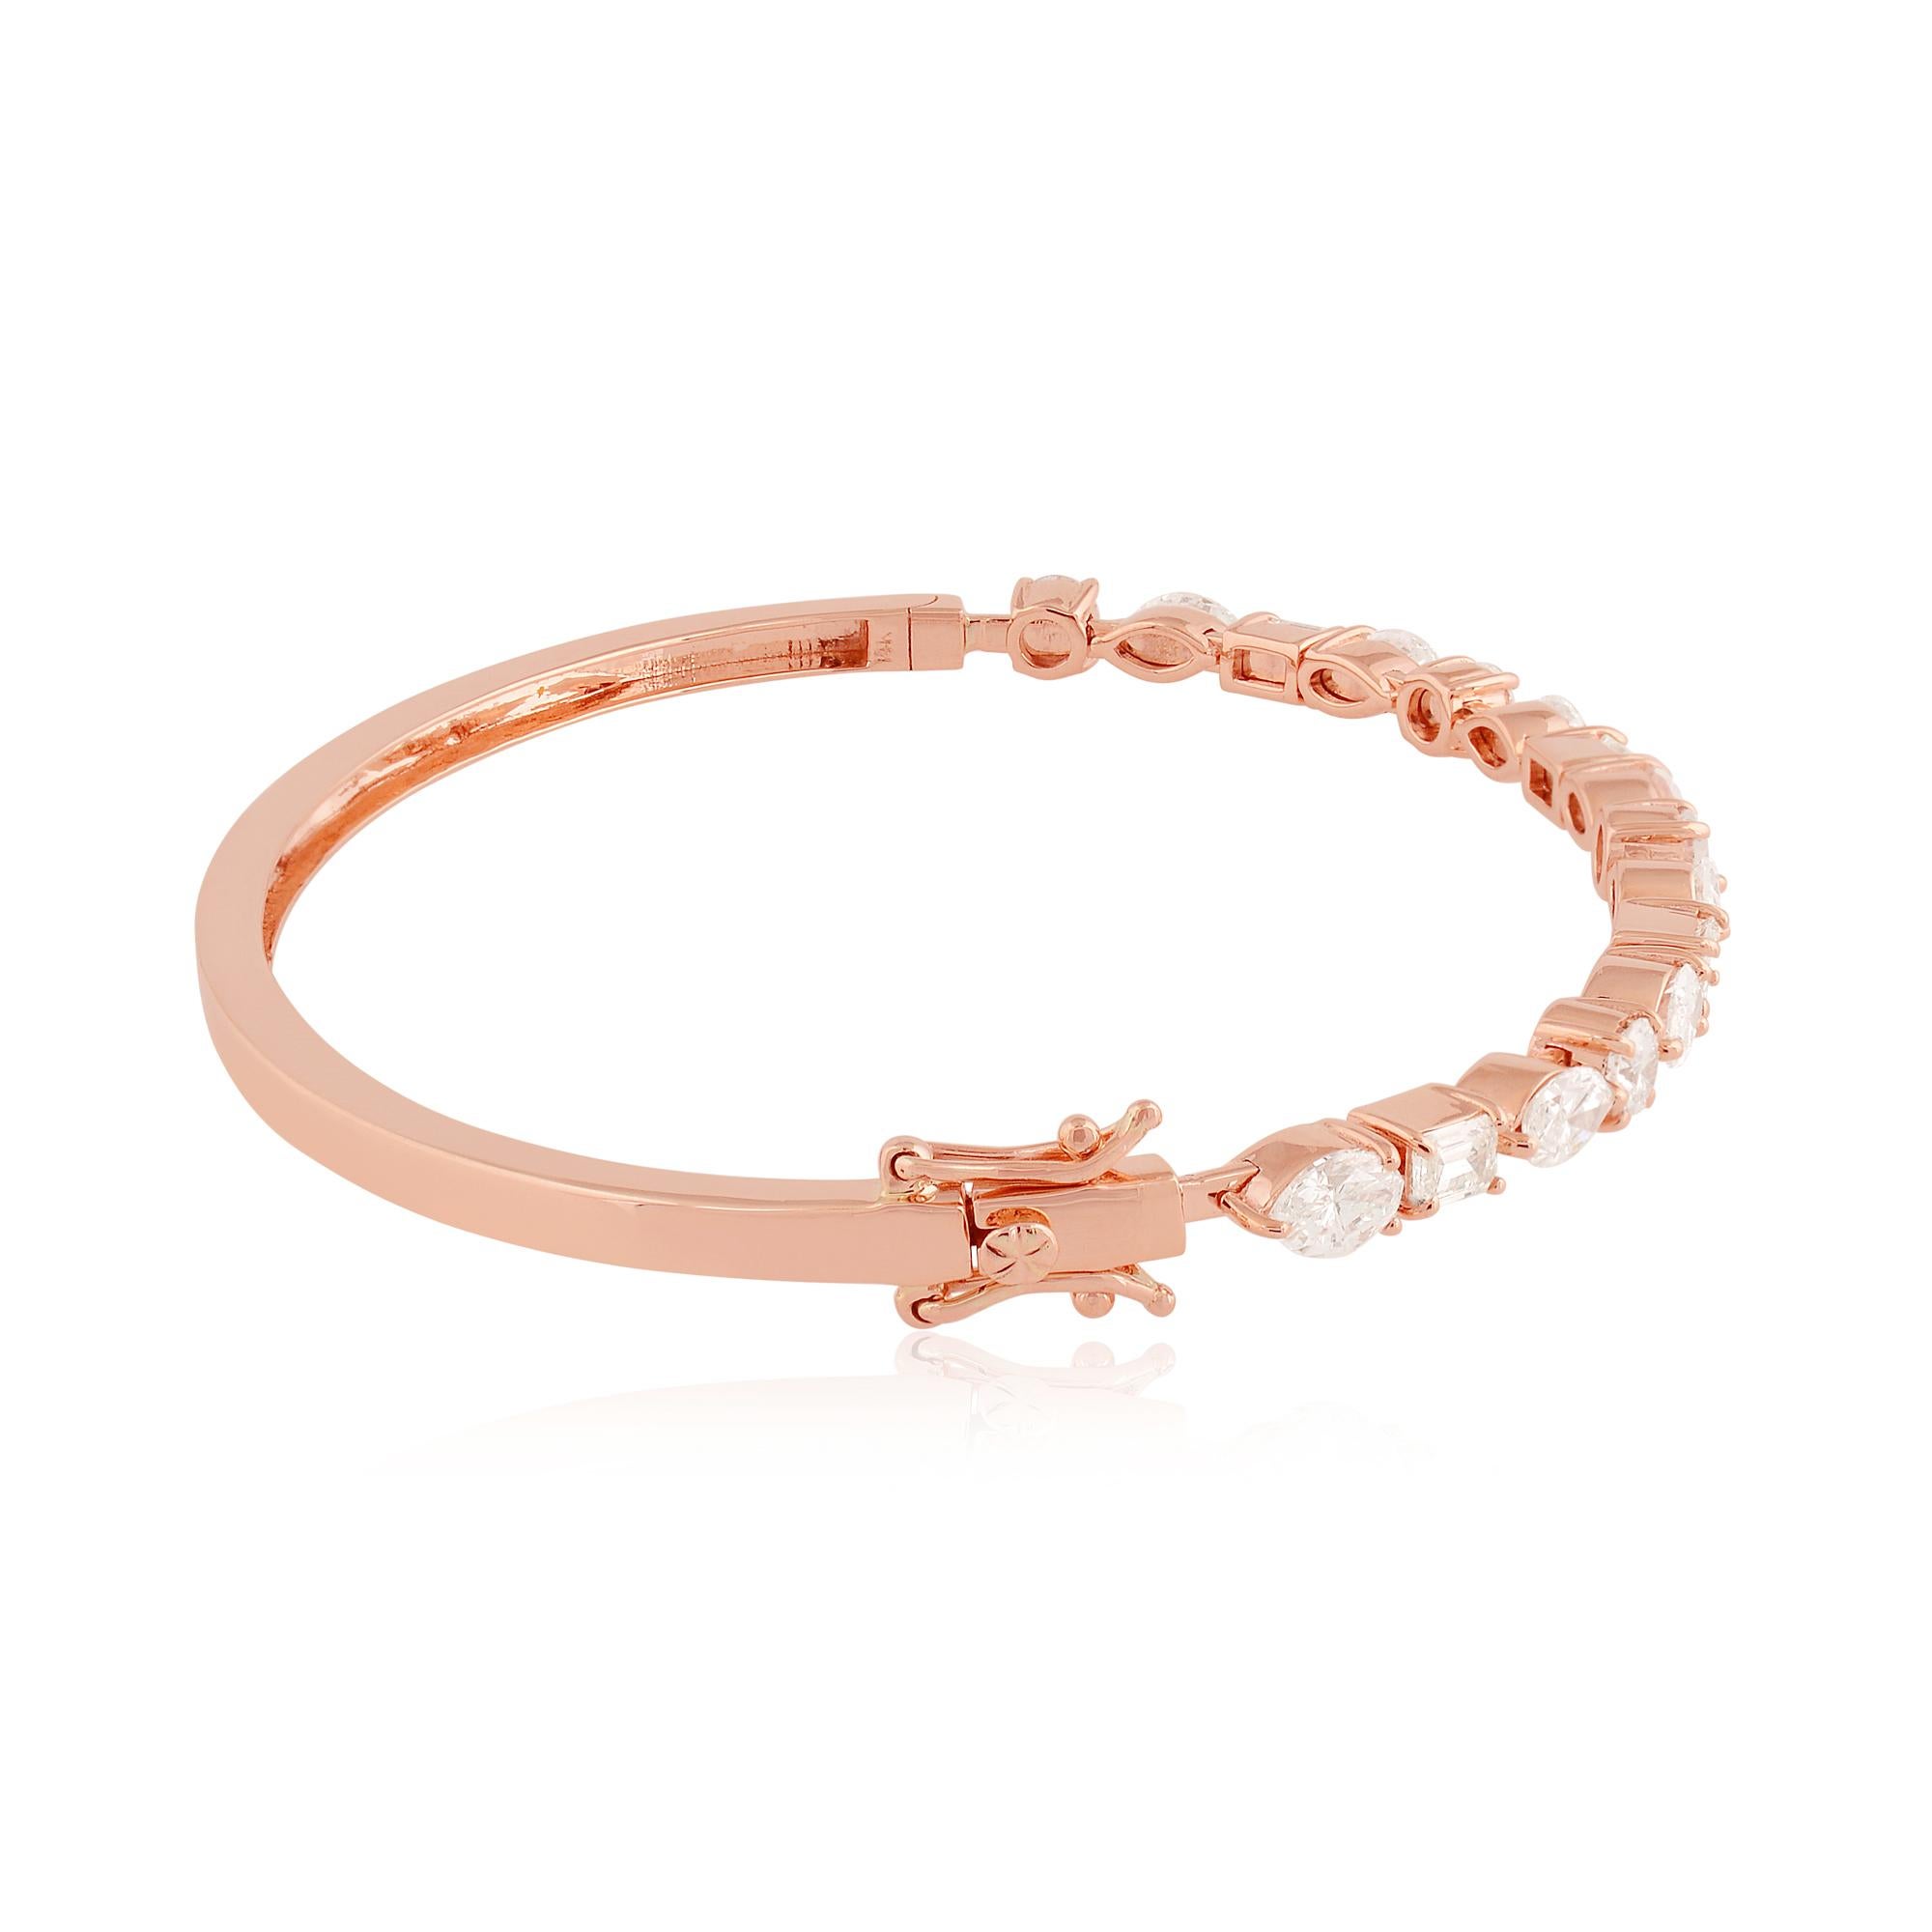 Make a statement with this elegant Diamond Bangle Bracelet, handcrafted with care to create a sophisticated and timeless piece of jewelry. The bangle style is both elegant and versatile, making it suitable for any occasion. This Bracelet is